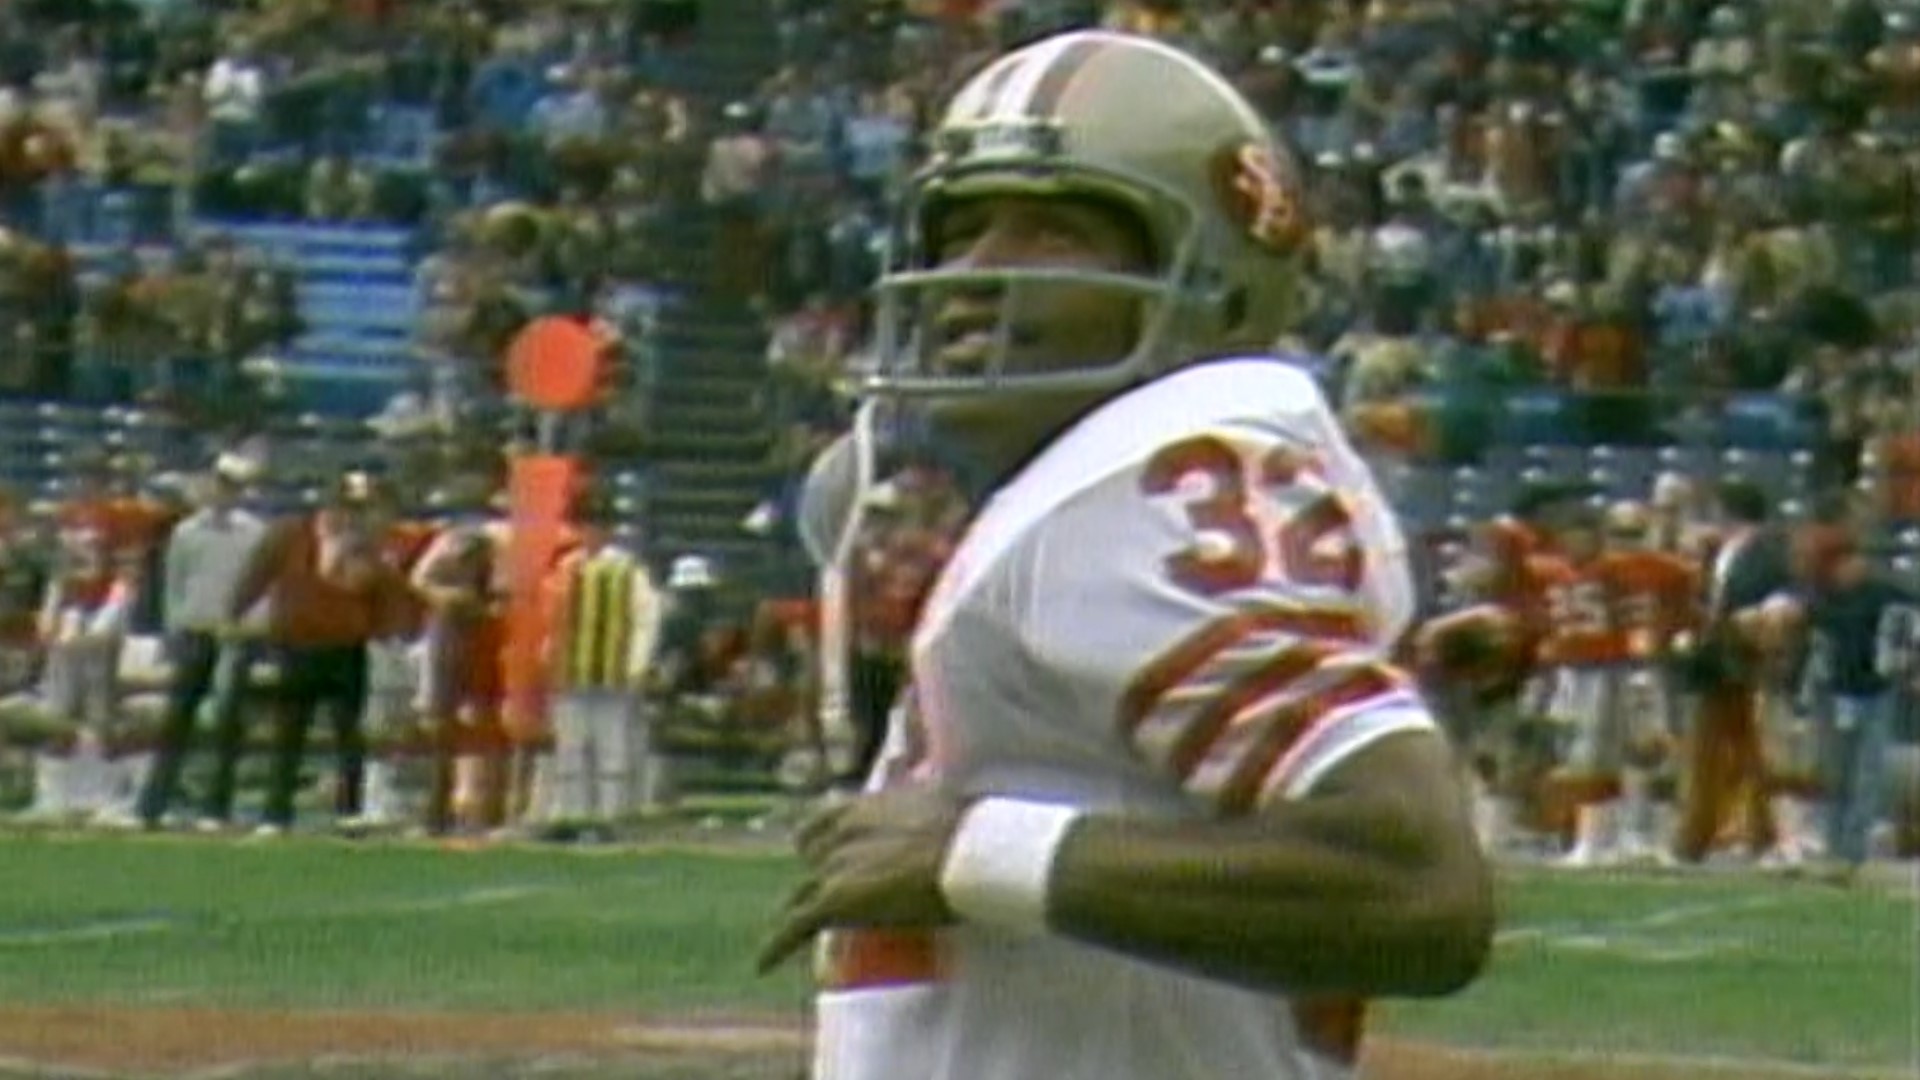 On Dec. 16, 1979, he ran the last plays of his pro career as the San Francisco 49ers faced off against the Falcons at Atlanta-Fulton County Stadium.